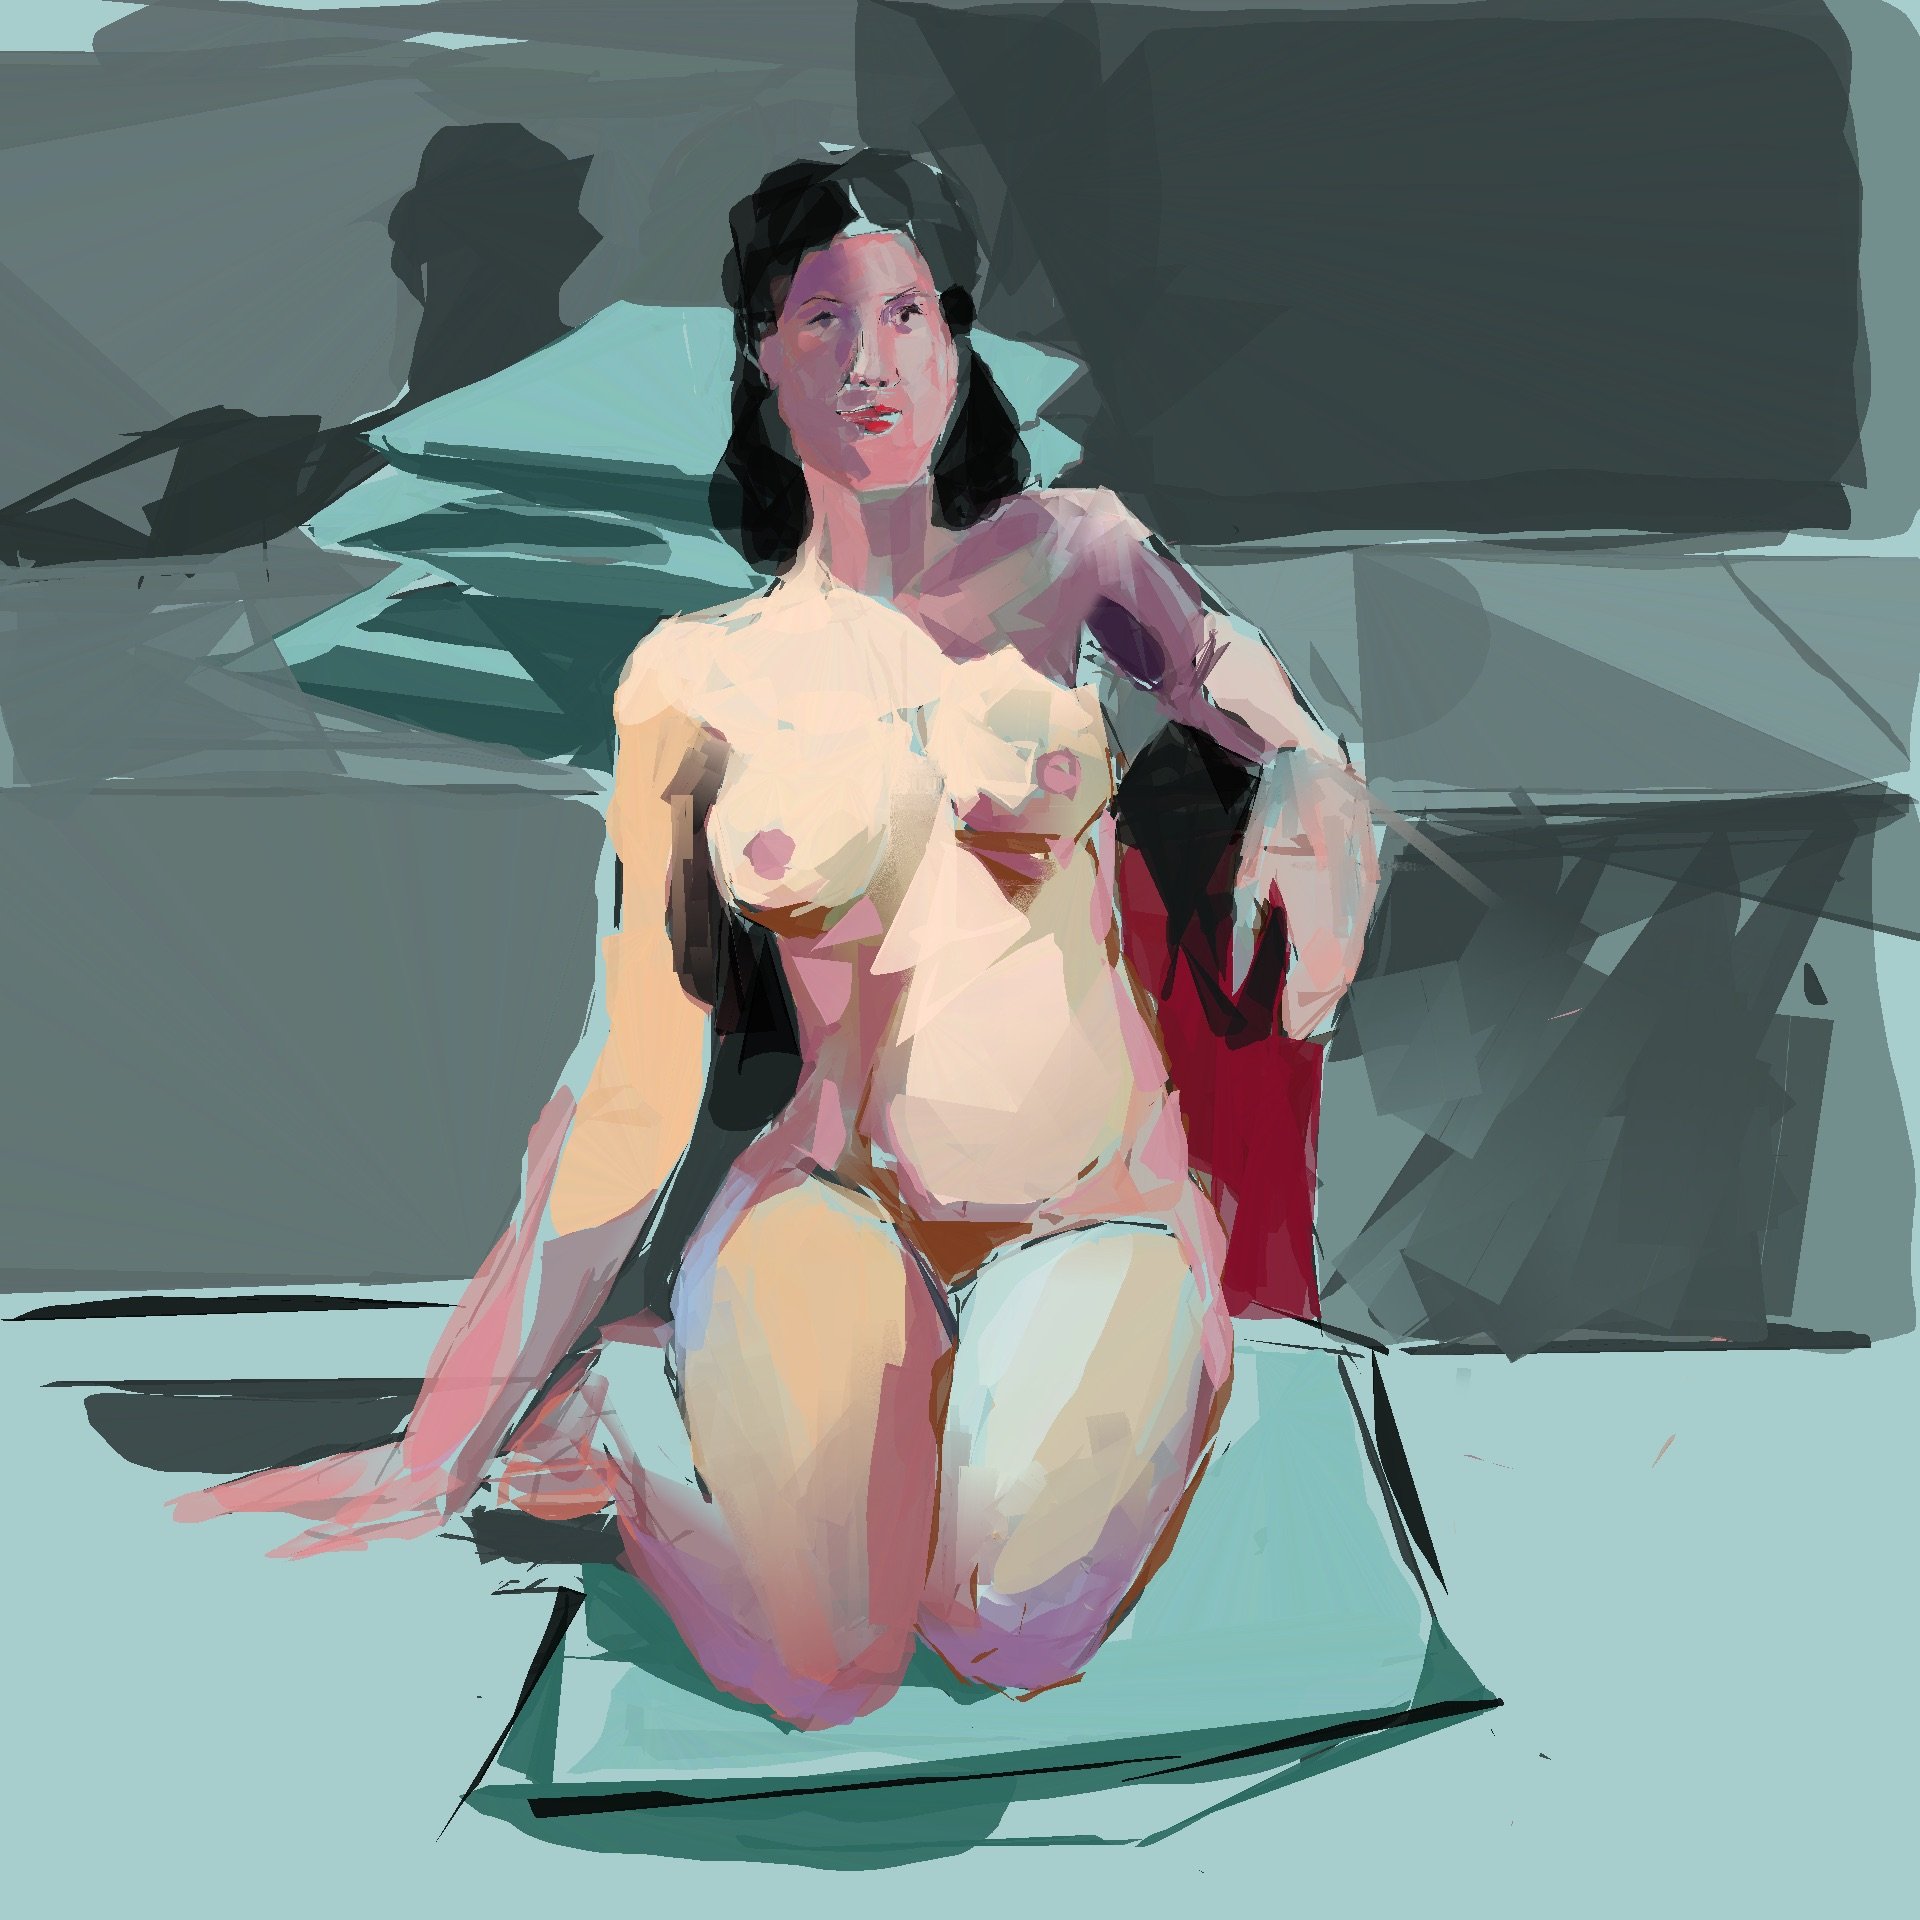 C. R. Seated, Digital Painting, 24 by 24 inches, 2022.